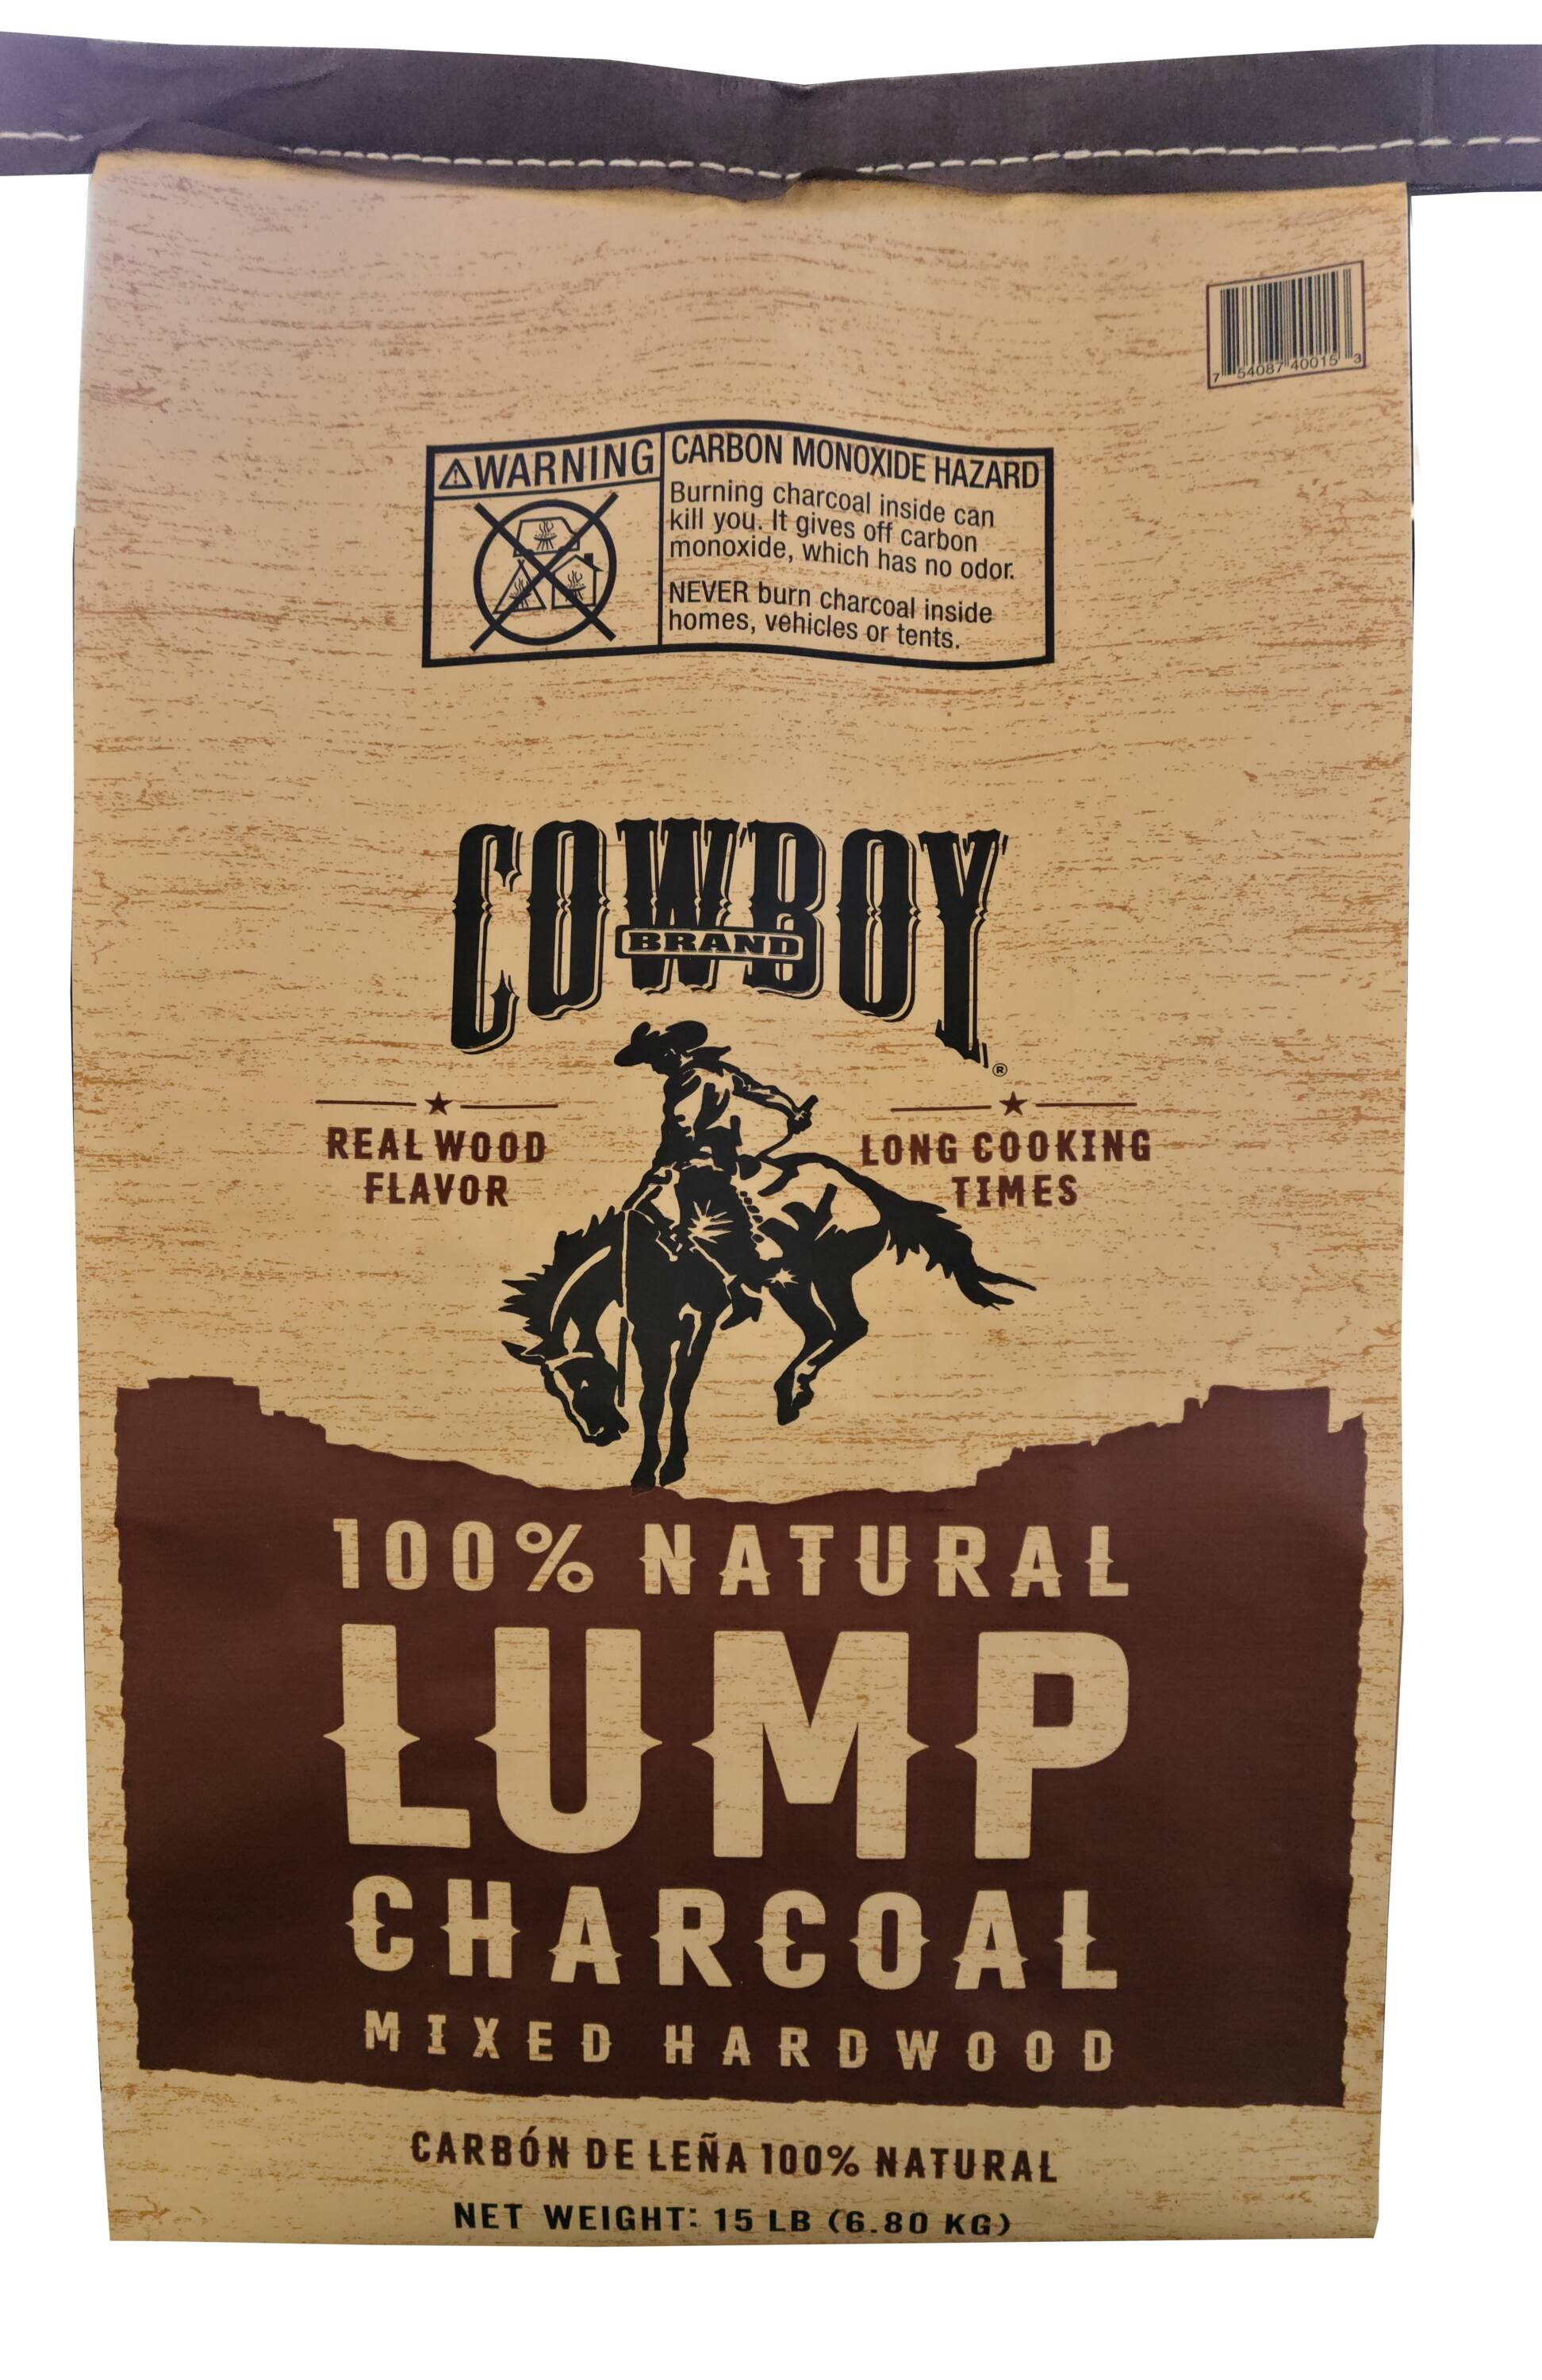 Fluid　Hot　Lighter　Hardwood　Natural,　Needed　Charcoal　Accessories　15-lb　in　Cowboy　All　Charcoal　the　Fast　Burns　Charcoal　No　Lump　and　department　at